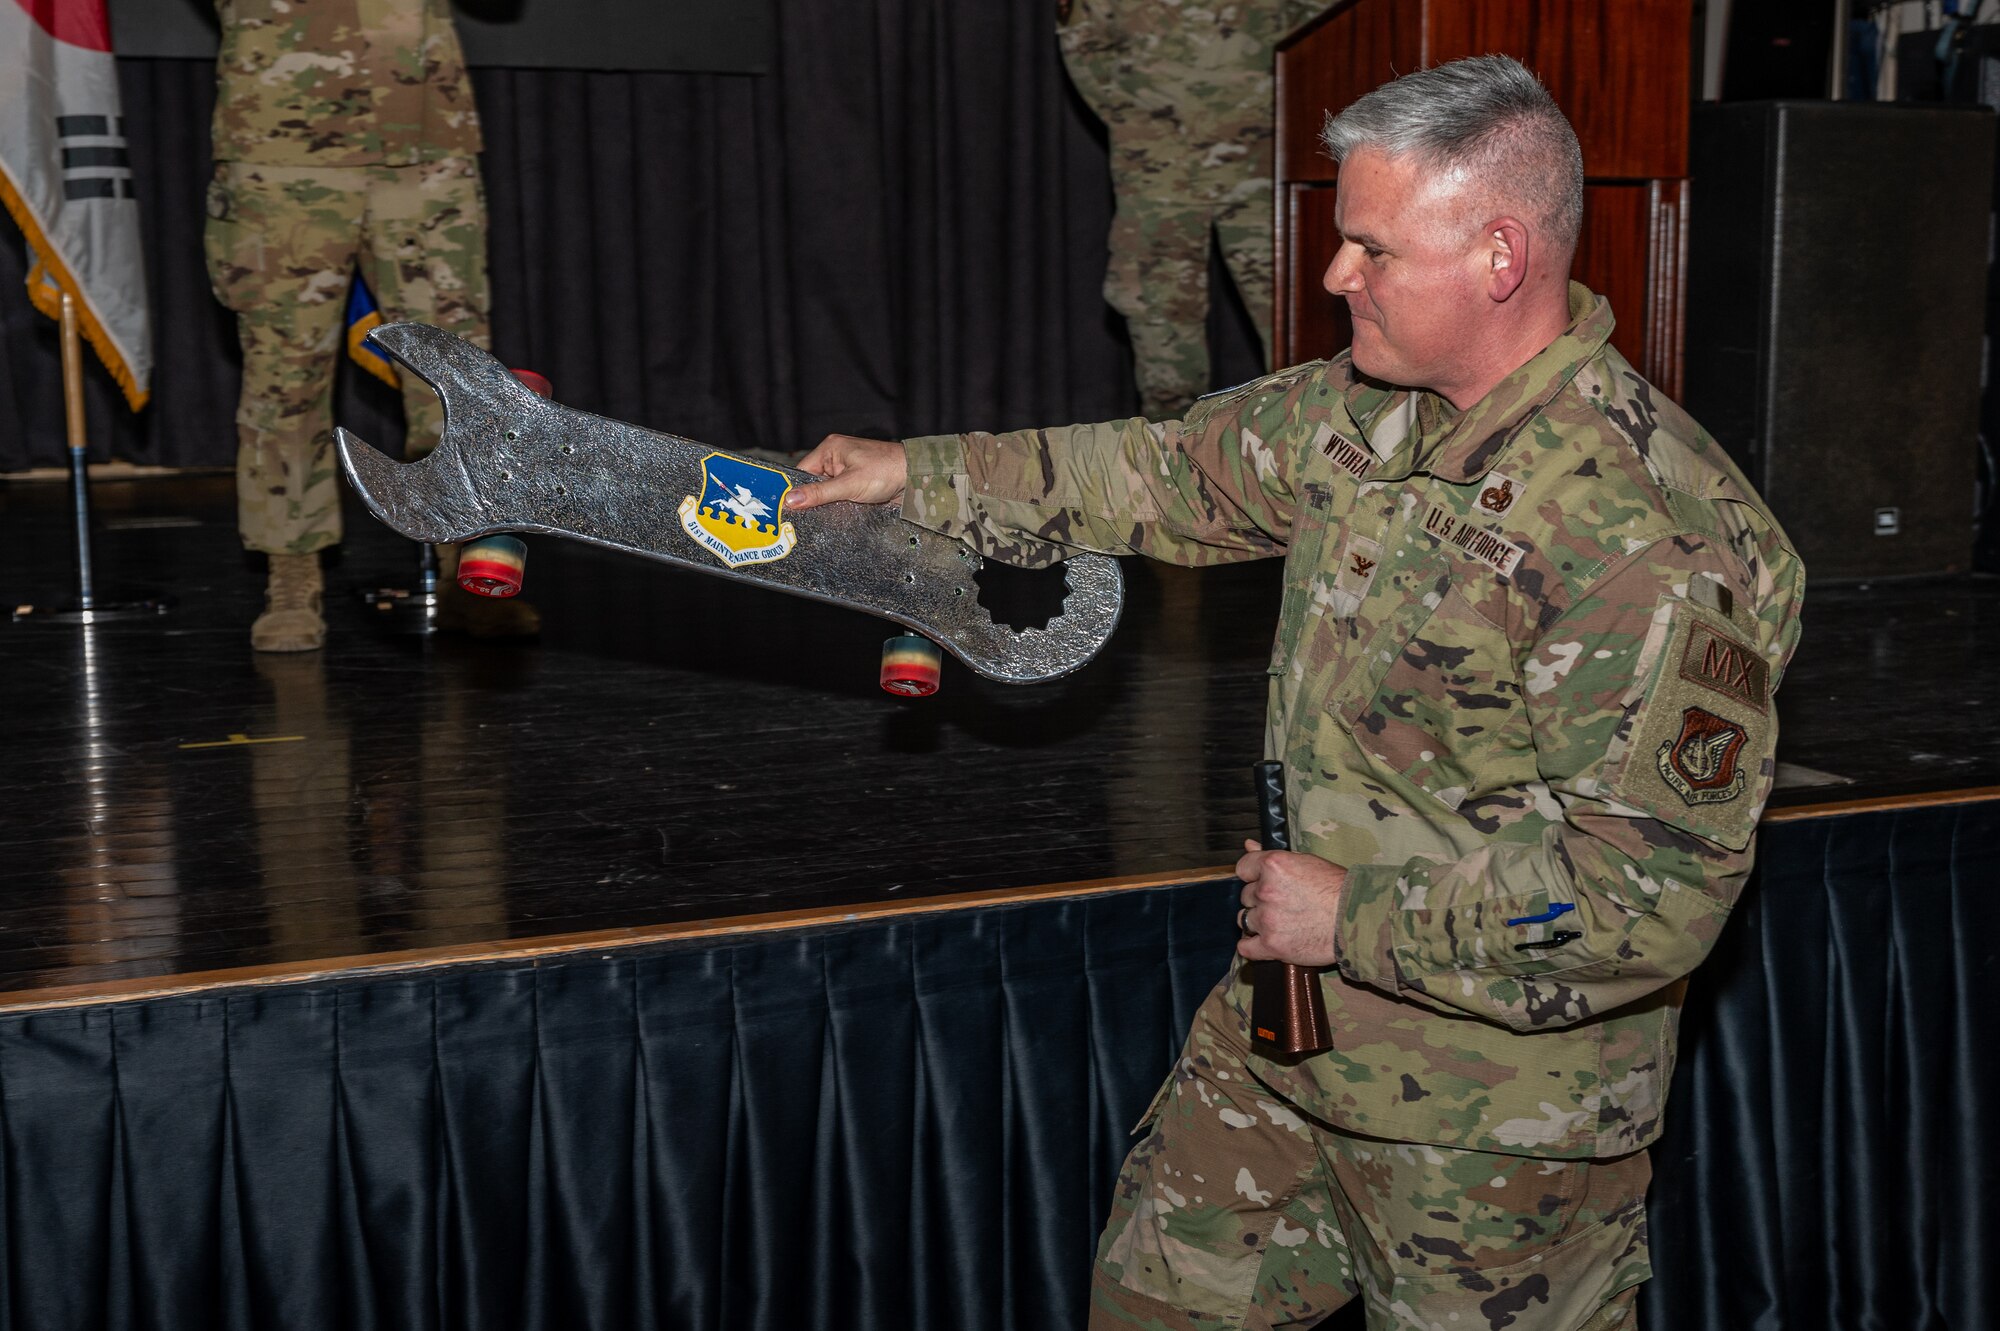 U.S. Air Force Col. Todd Wydra, 51st Maintenance Group commander, sets a skateboard on the stage during the 51st Fighter Wing quarterly awards ceremony at Osan Air Base, Republic of Korea, Jan. 19, 2024. Wing leadership regularly acknowledges outstanding performers, expressing appreciation for their contributions to the "Fight Tonight" mission. (U.S. Air Force photo by Airman 1st Class Chase Verzaal)